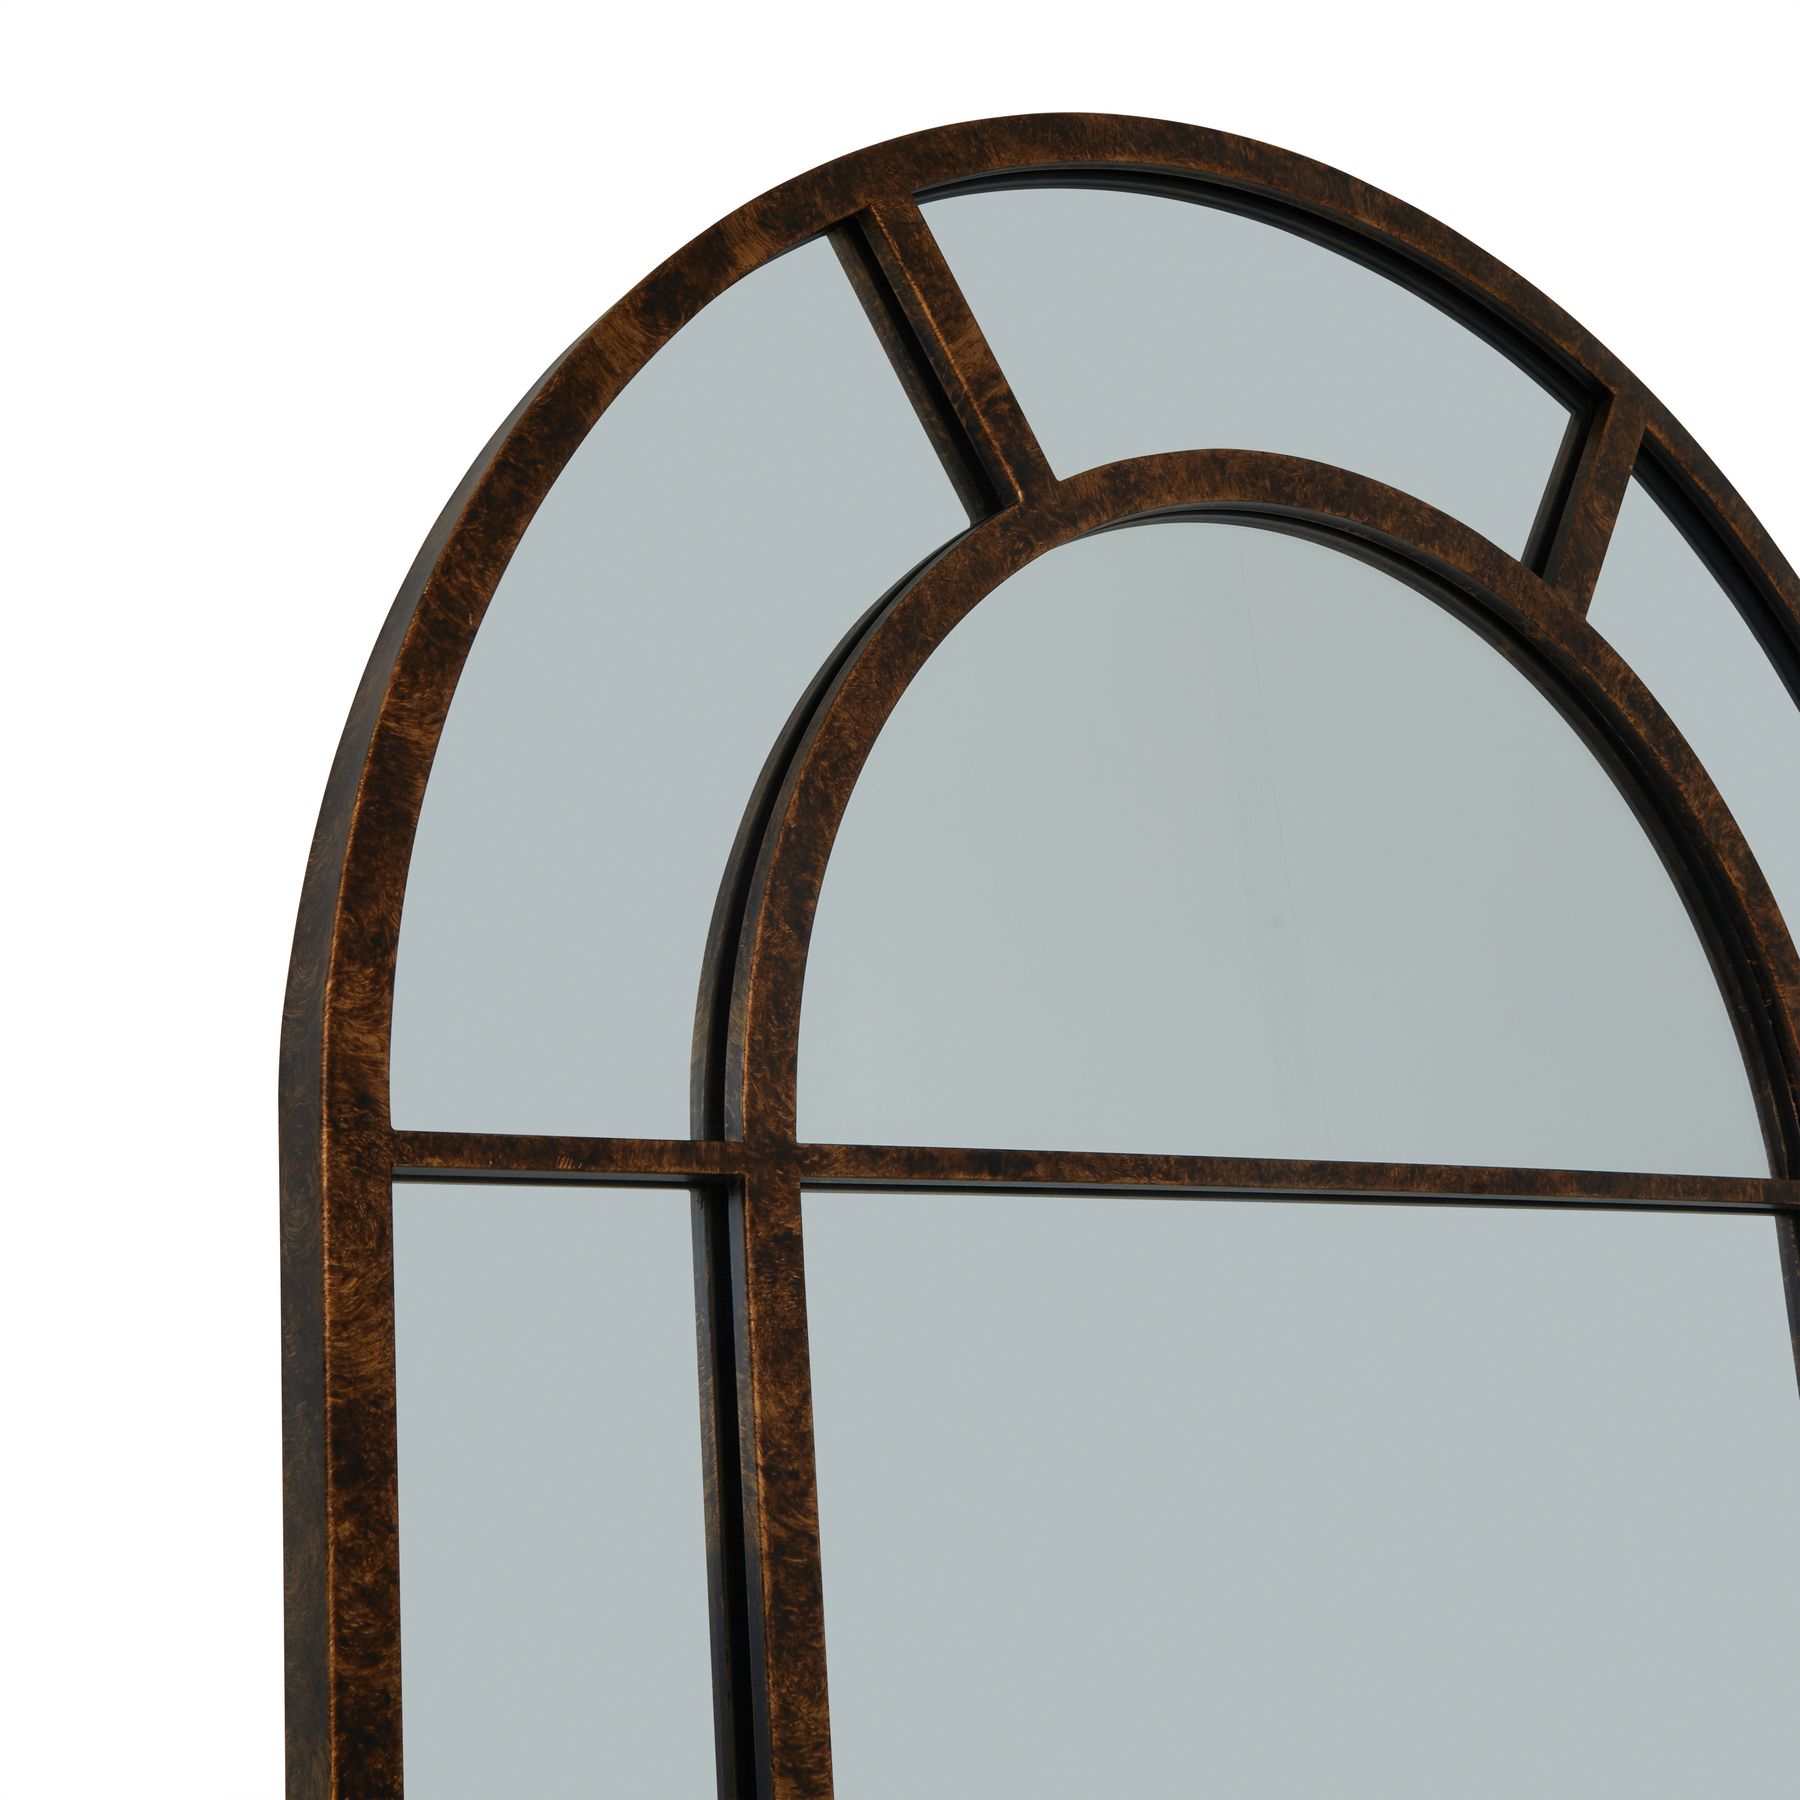 Rust Effect Large Arched Window Mirror - Image 2